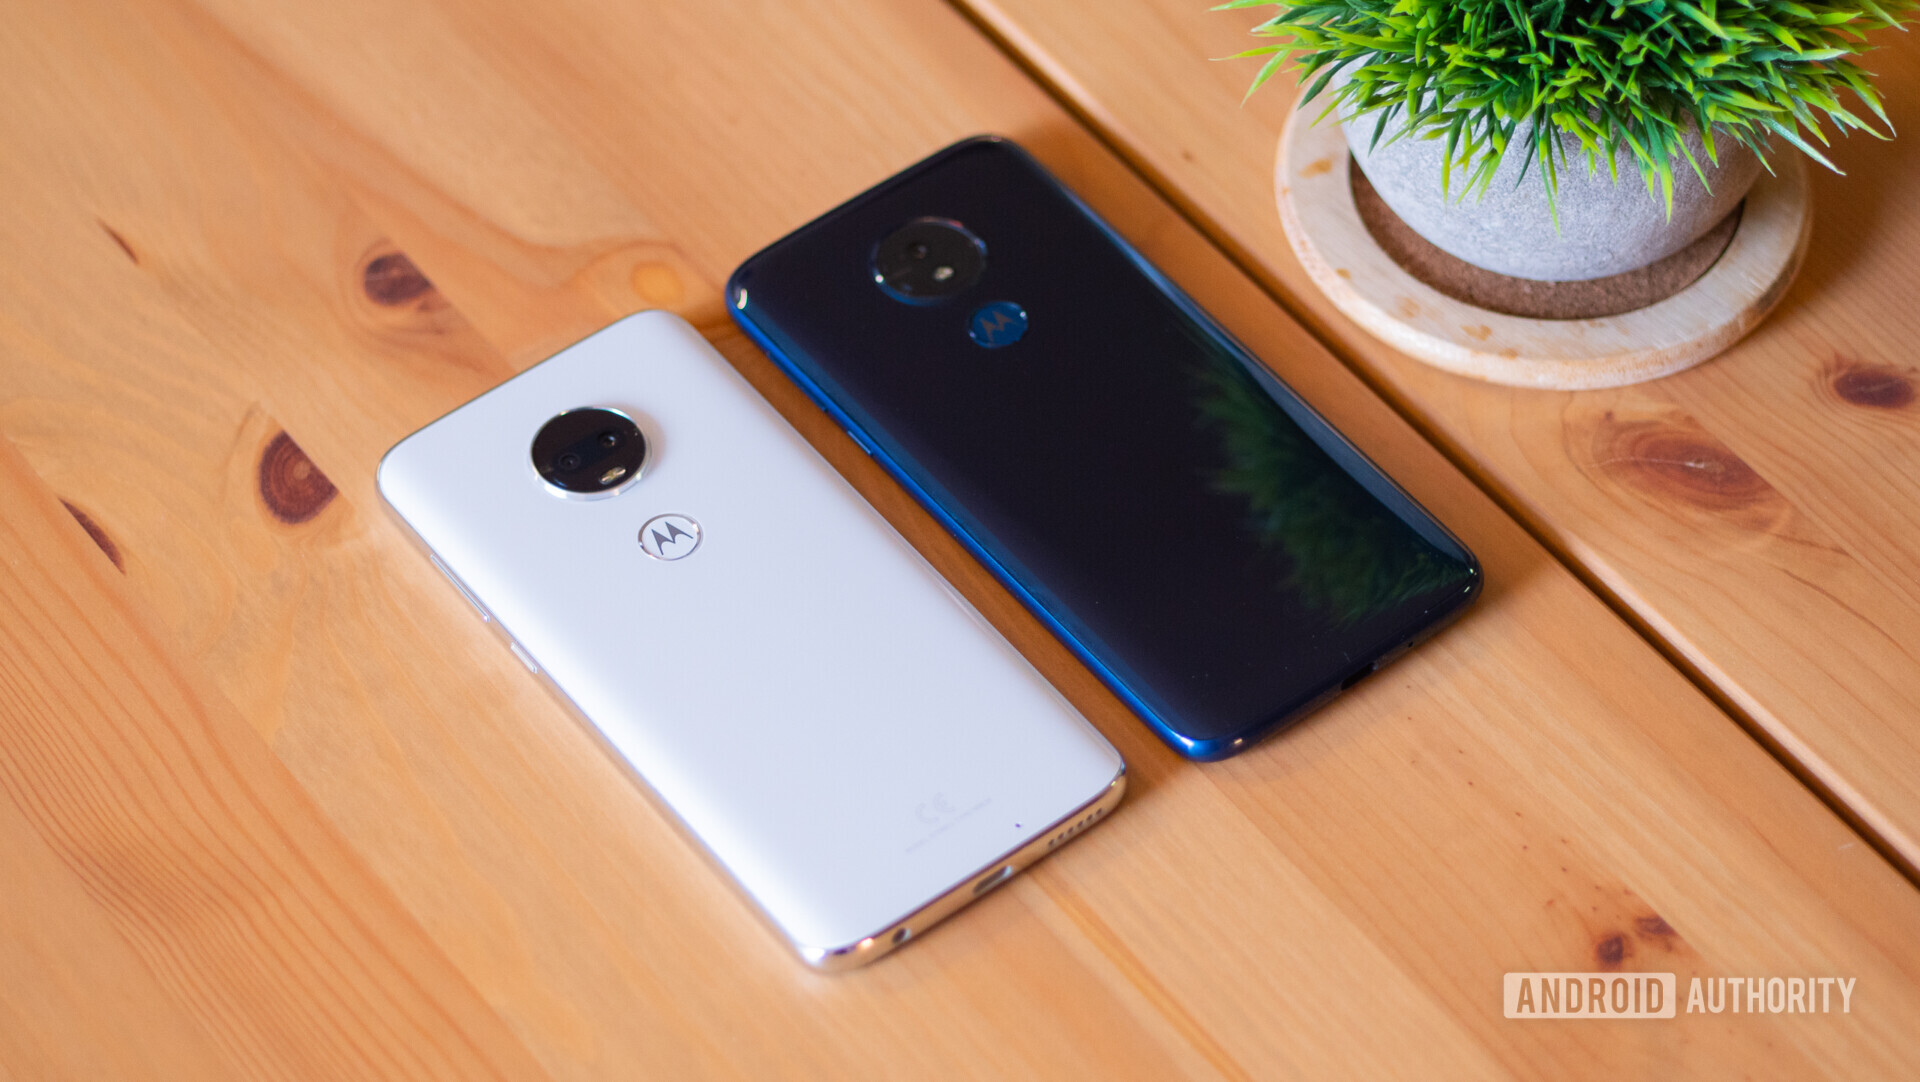 Moto G7 and G7 Power rear panels